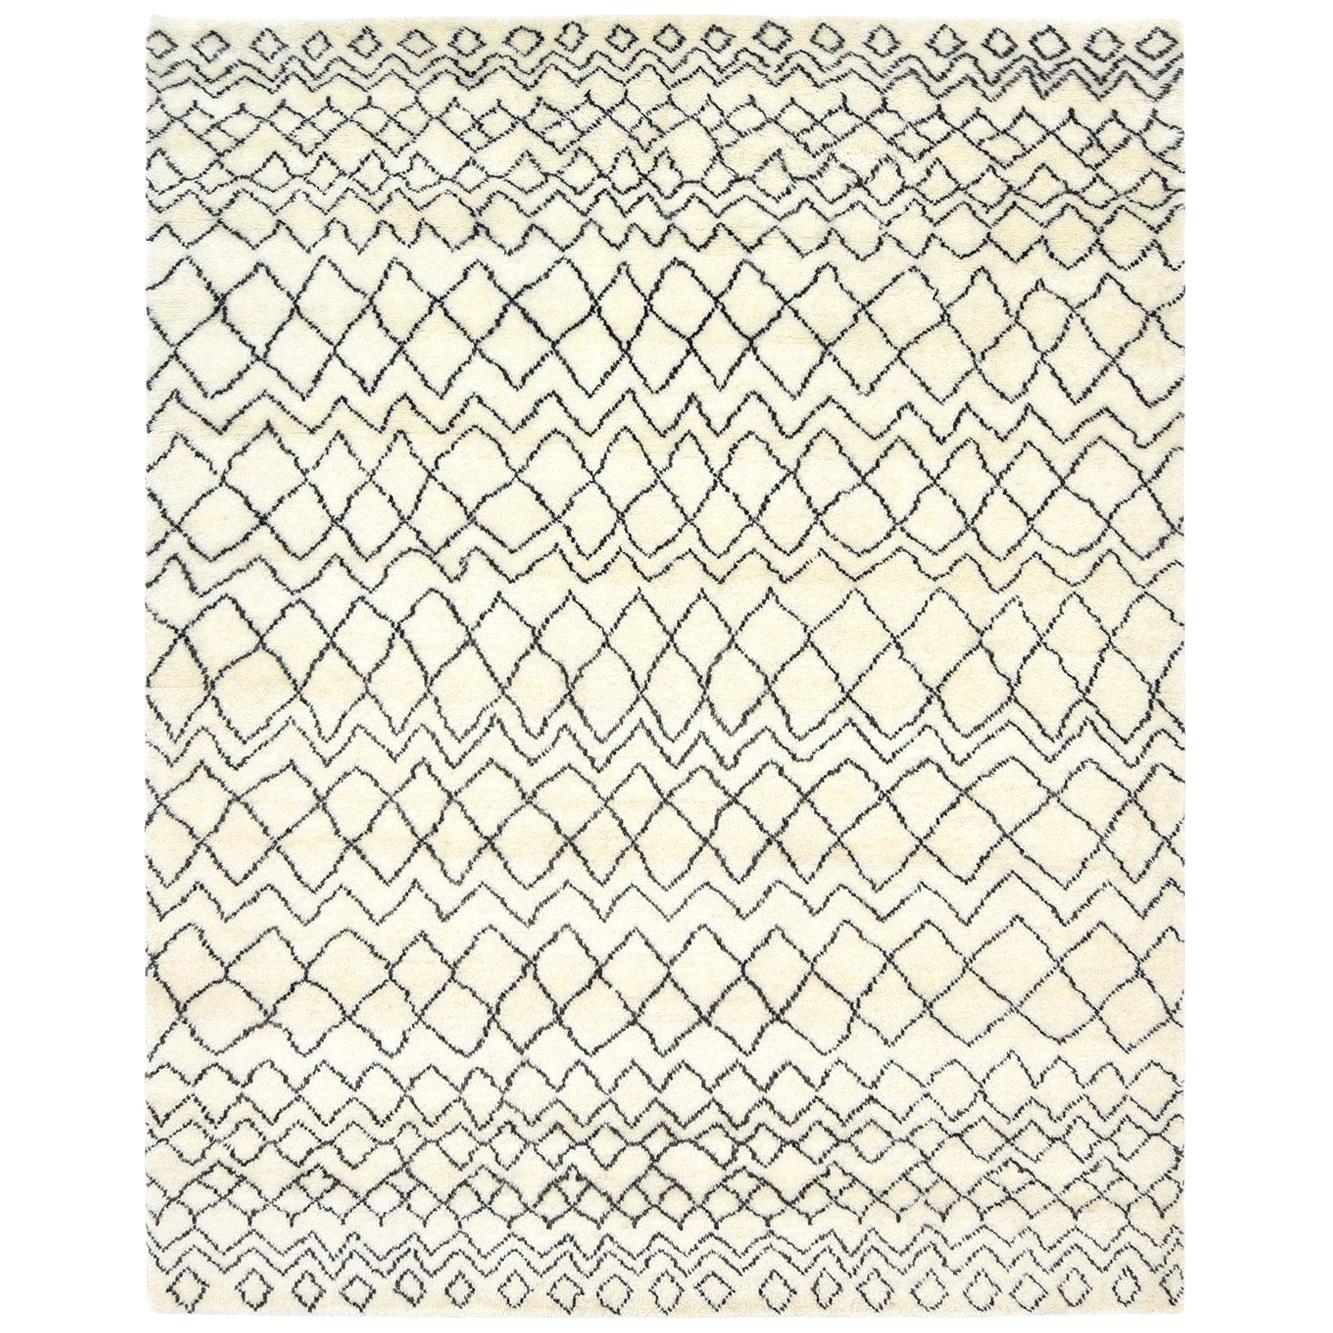 Indian Made Hand-Knotted Bohemian Moroccan Inspired Inspired Area Rug